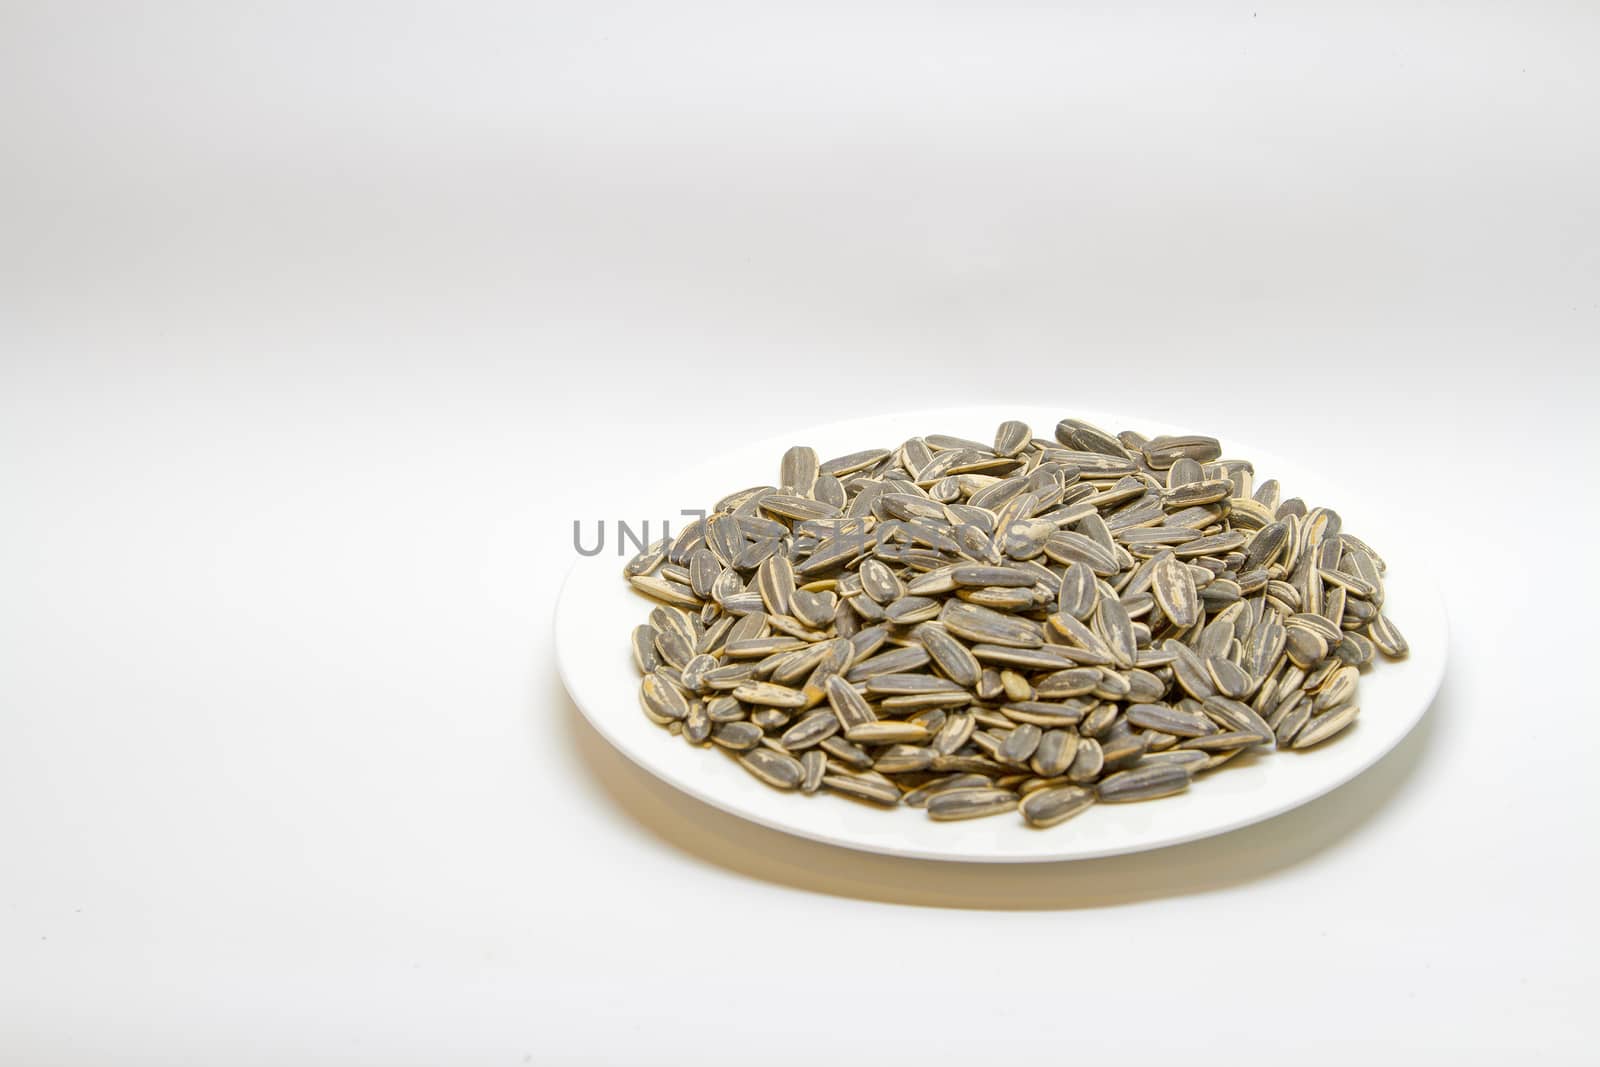 Dried sunflower seeds in the white plate on white background. by TakerWalker